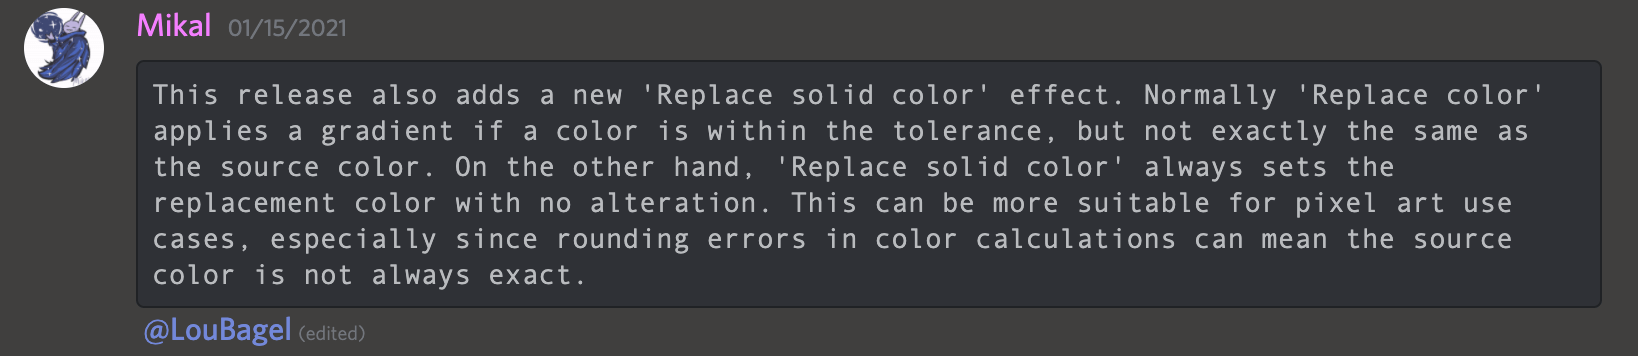 Construct 3 release notes about Replace Solid Color